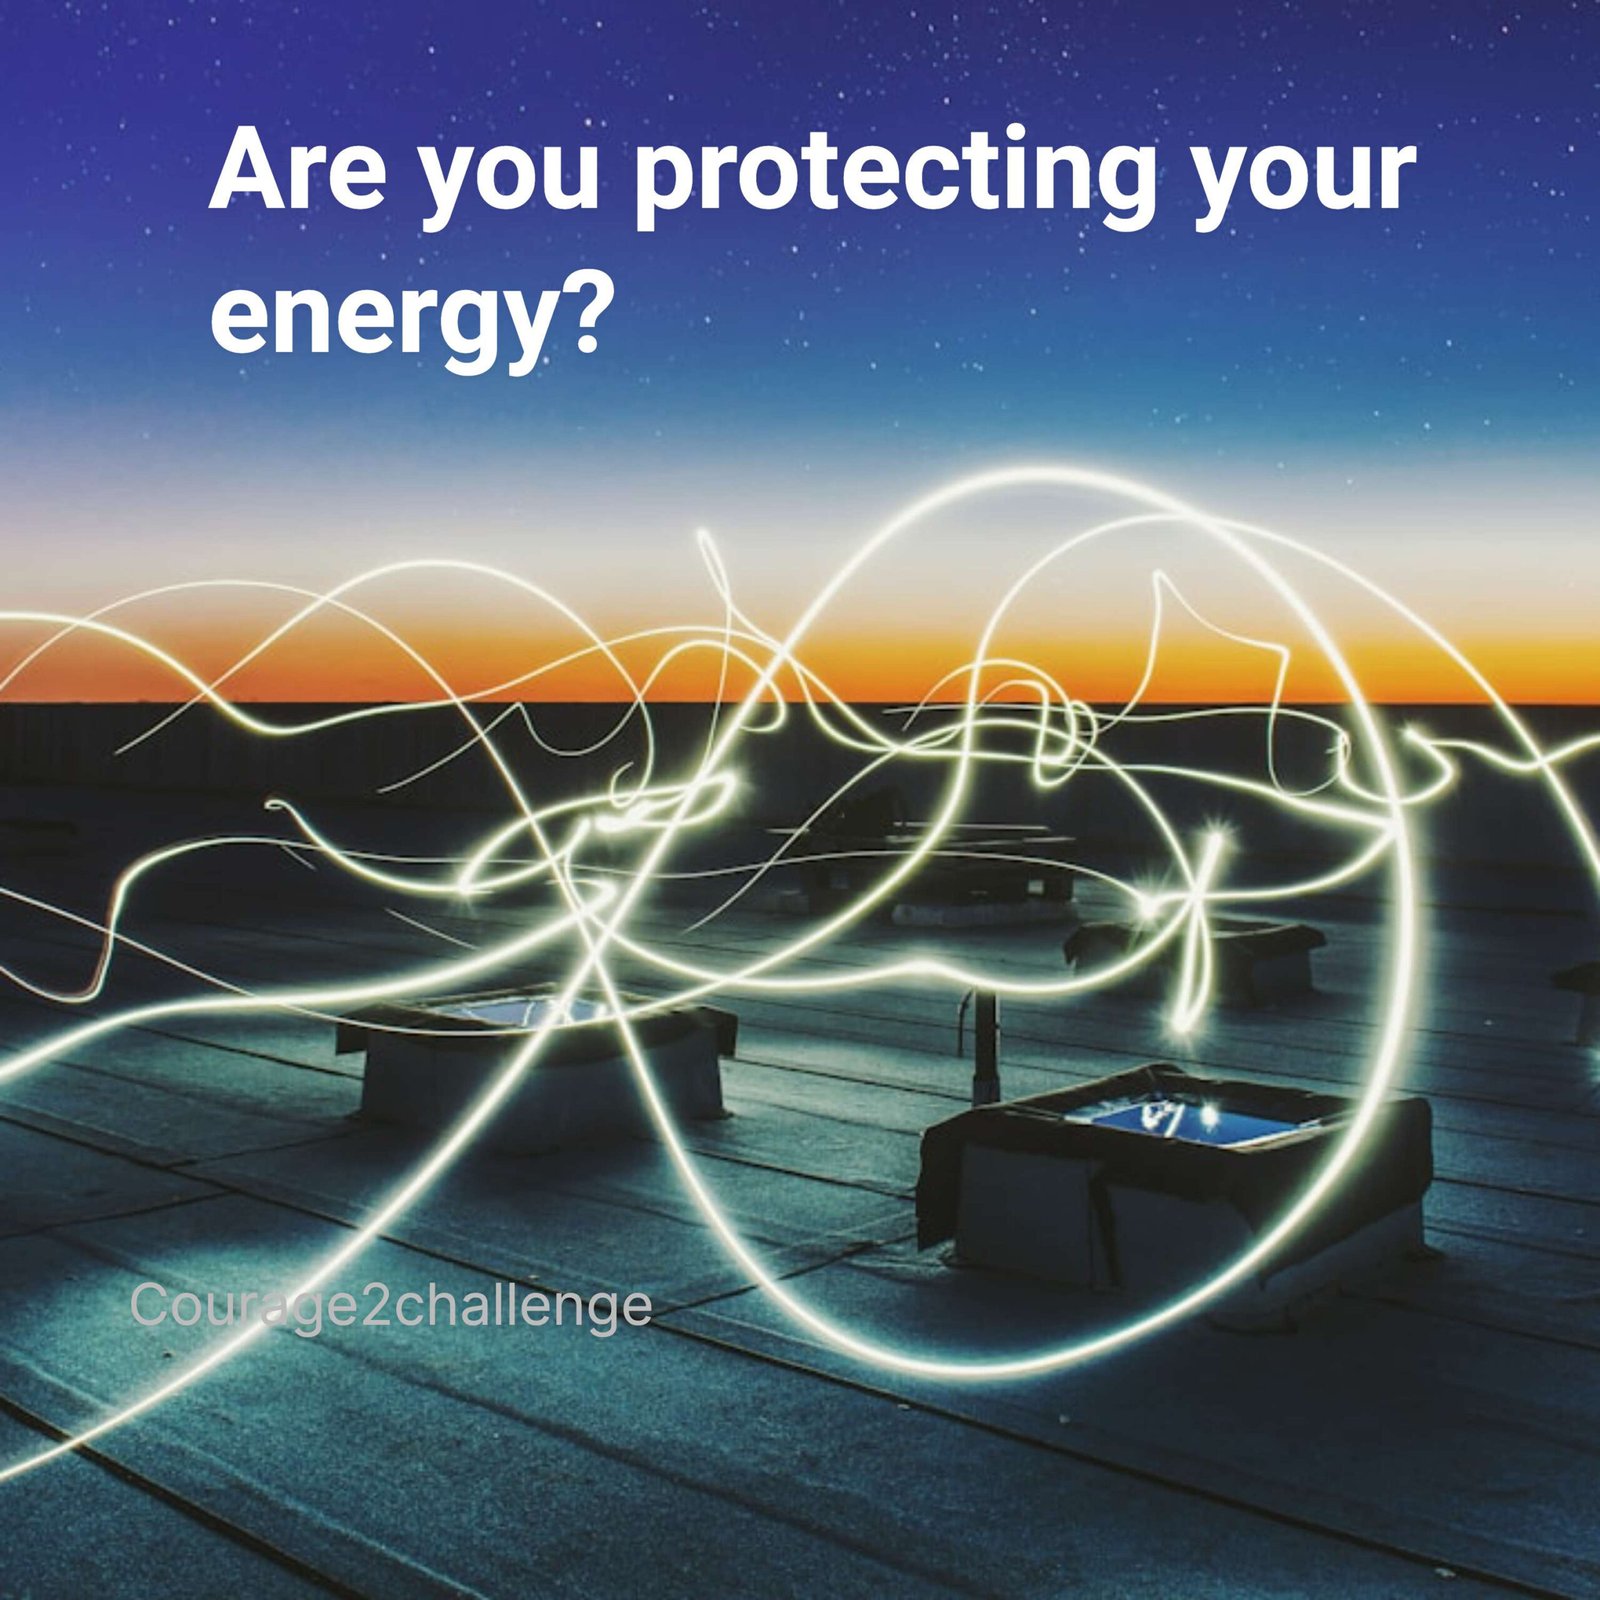 Are you protecting your energy?